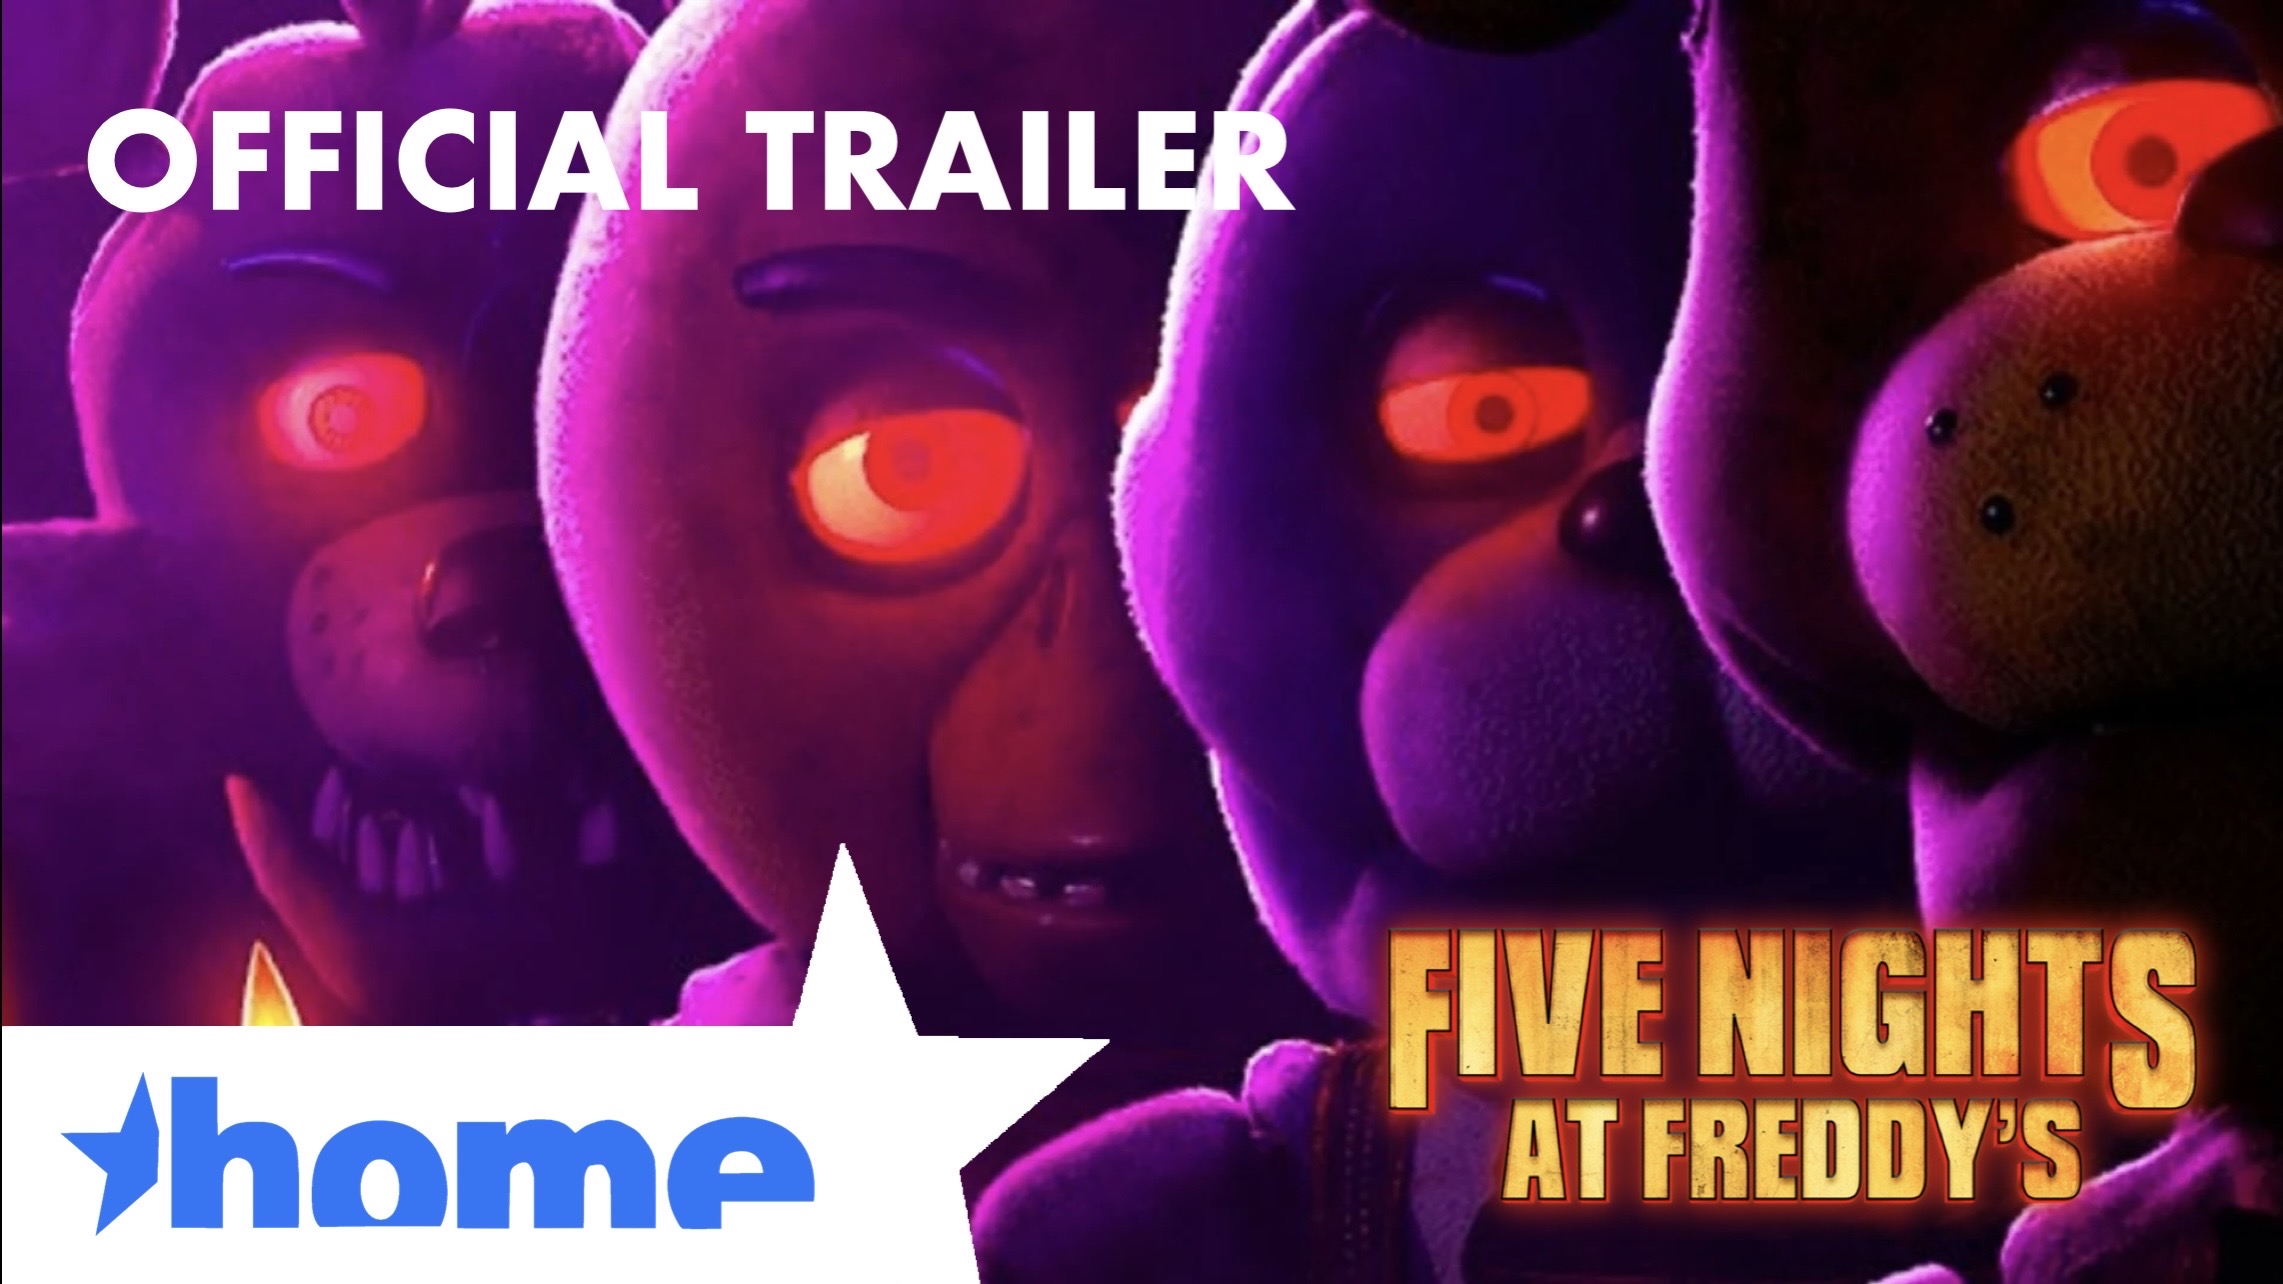 Five nights at freddy's, Tráiler oficial